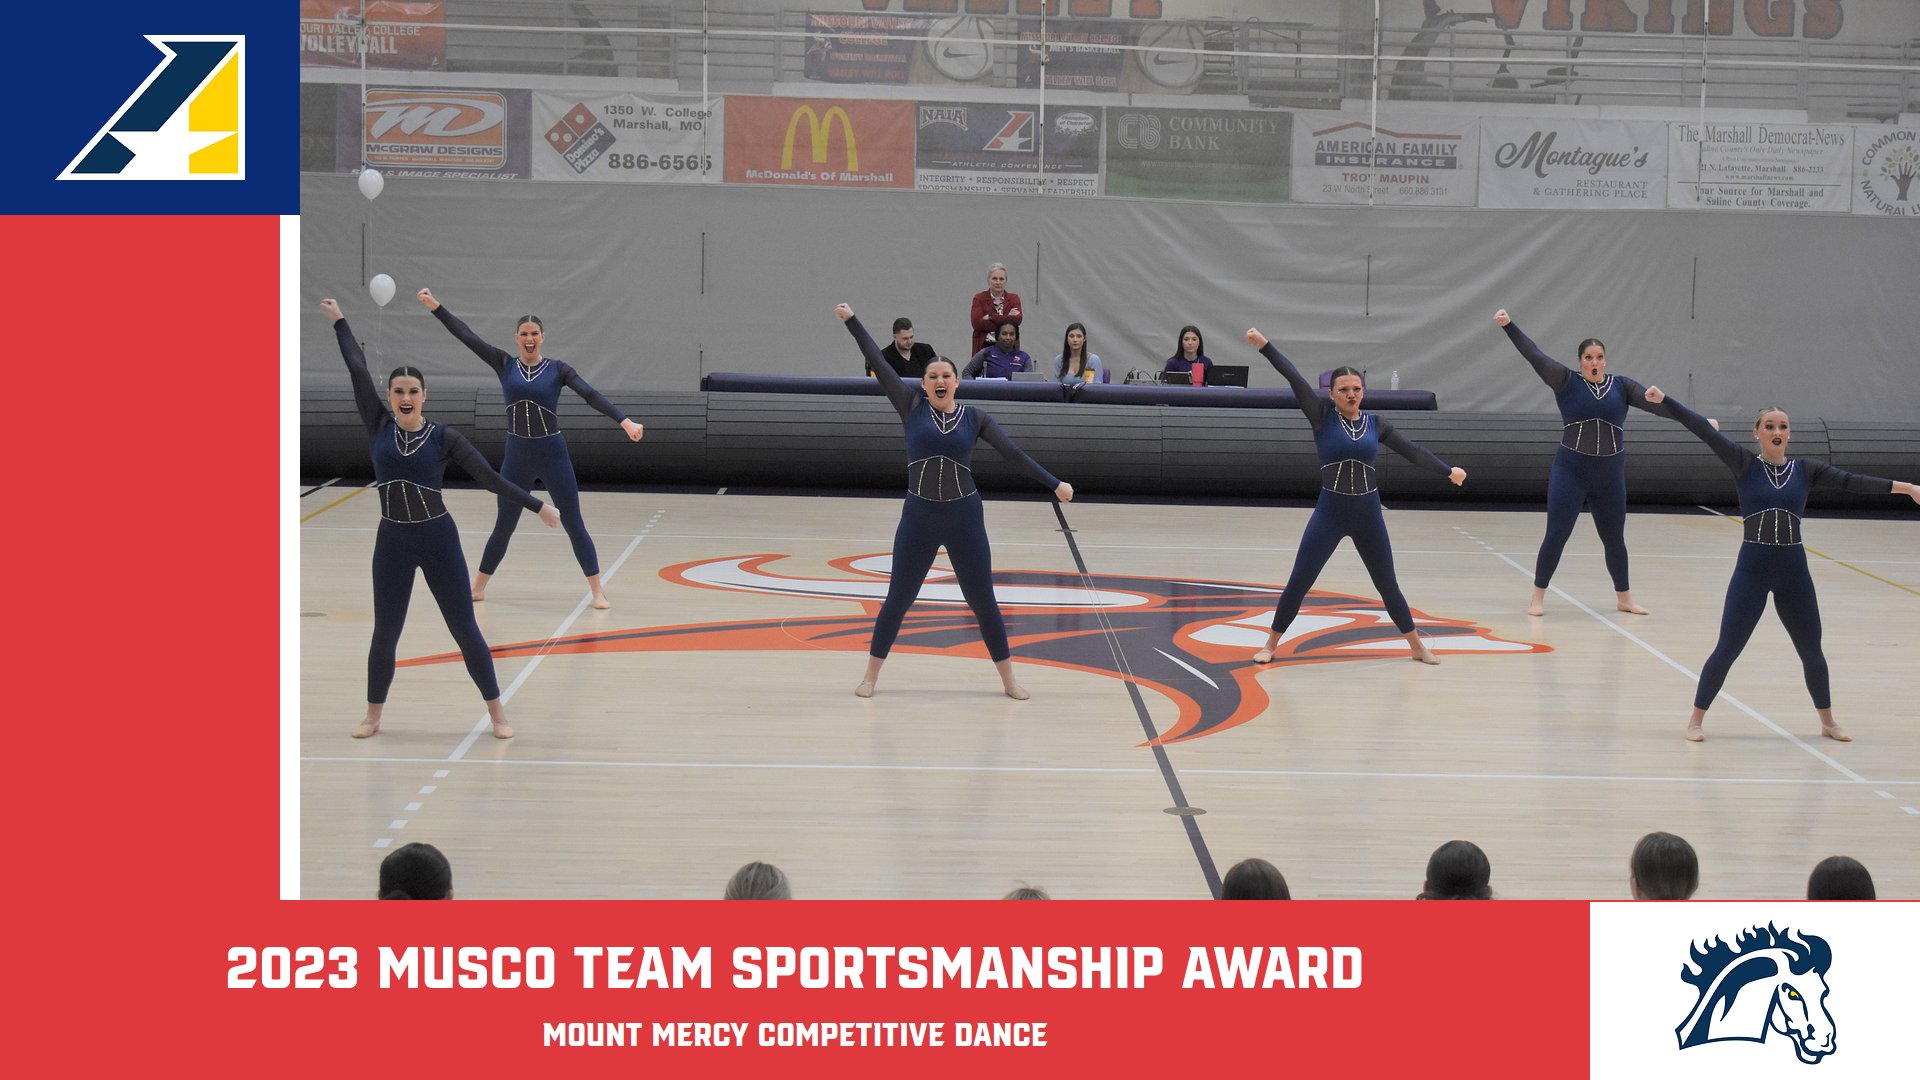 Mount Mercy Competitive Dance Selected 2023 Musco Team Sportsmanship Award Winners